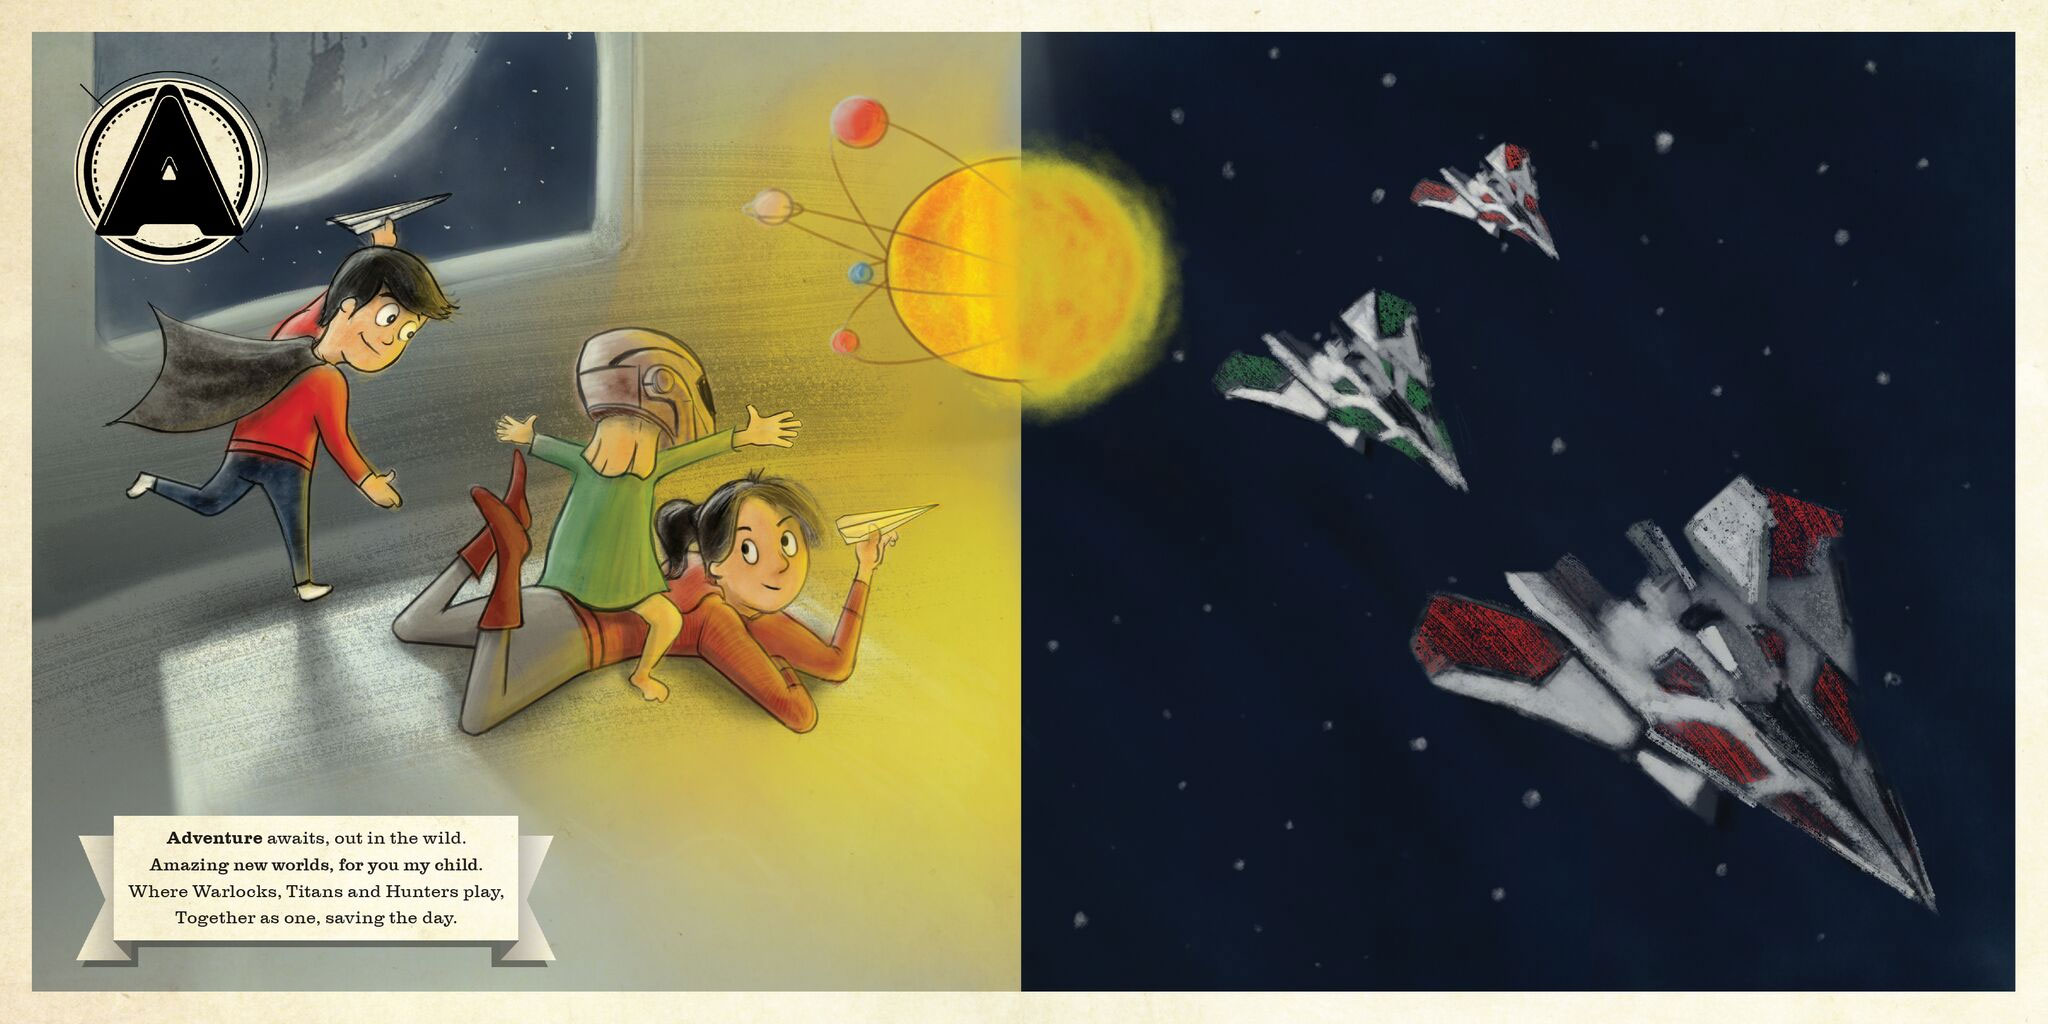 D Is For Destiny, A Children’s Book About Grinding In Space